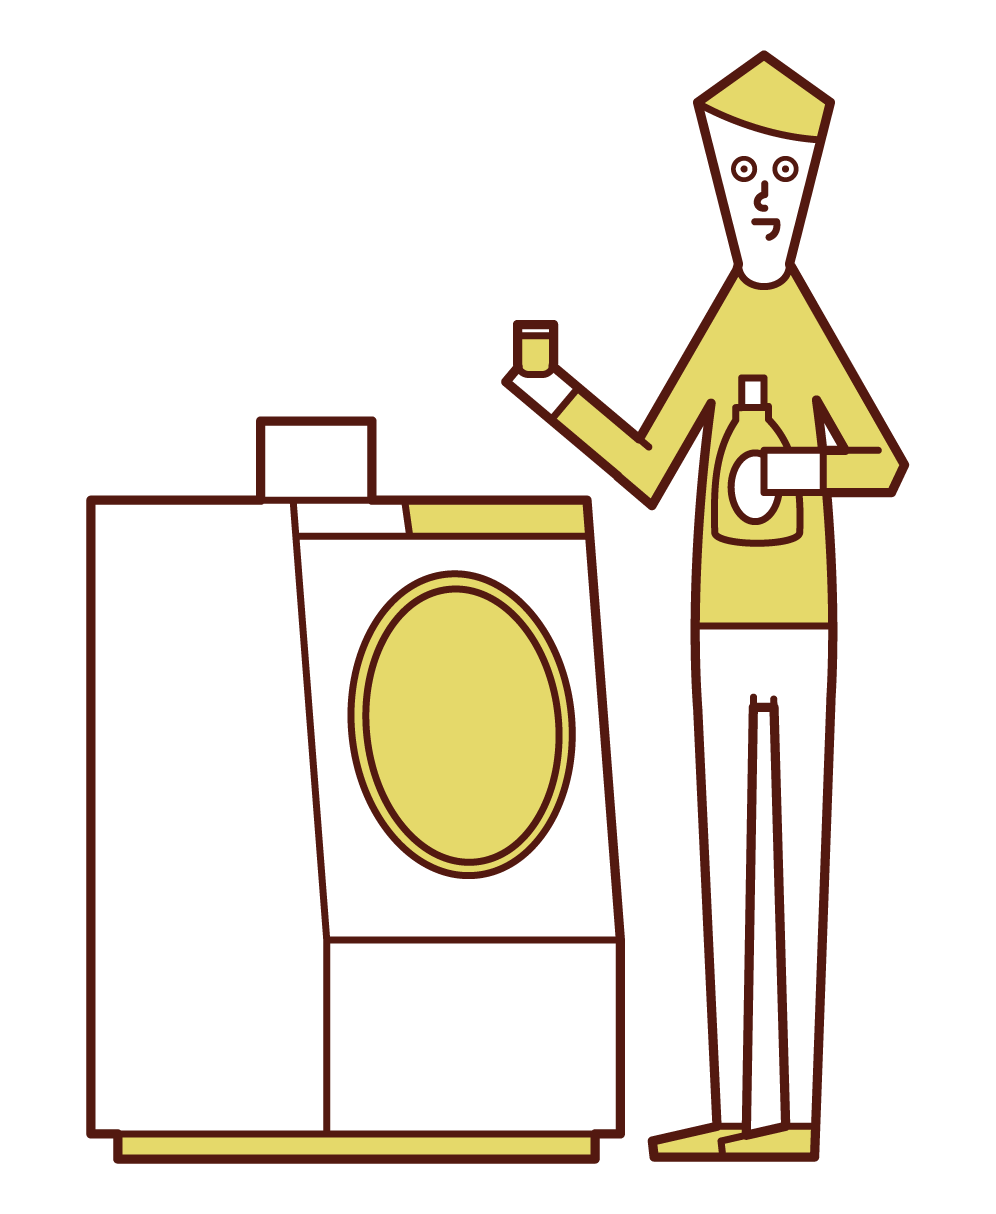 Illustration of a man who put detergent and softener in a washing machine